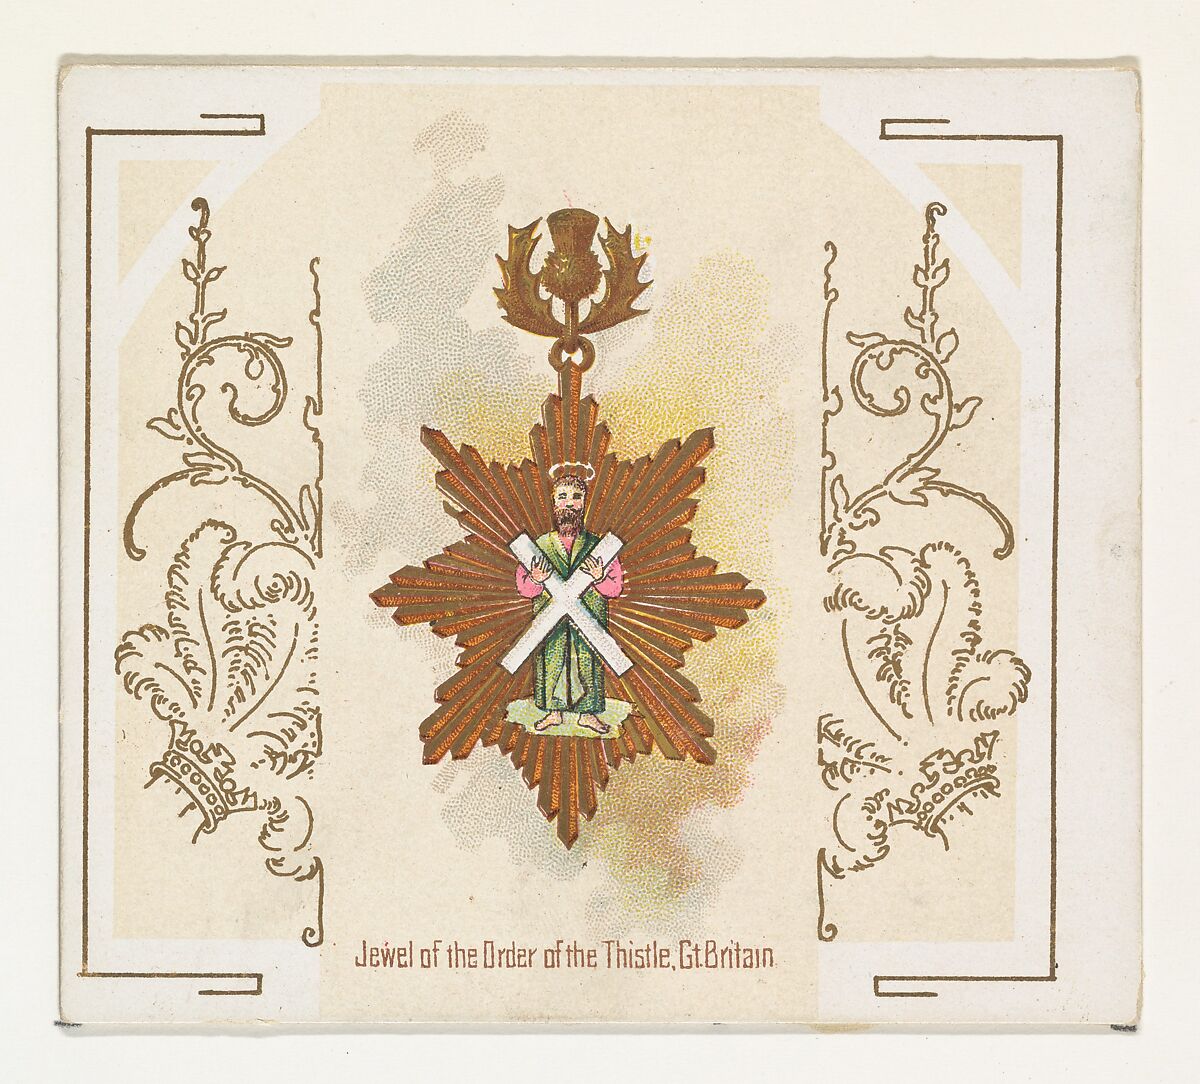 Jewel of the Order of the Thistle, Great Britain, from the World's Decorations series (N44) for Allen & Ginter Cigarettes, Issued by Allen &amp; Ginter (American, Richmond, Virginia), Commercial color lithograph 